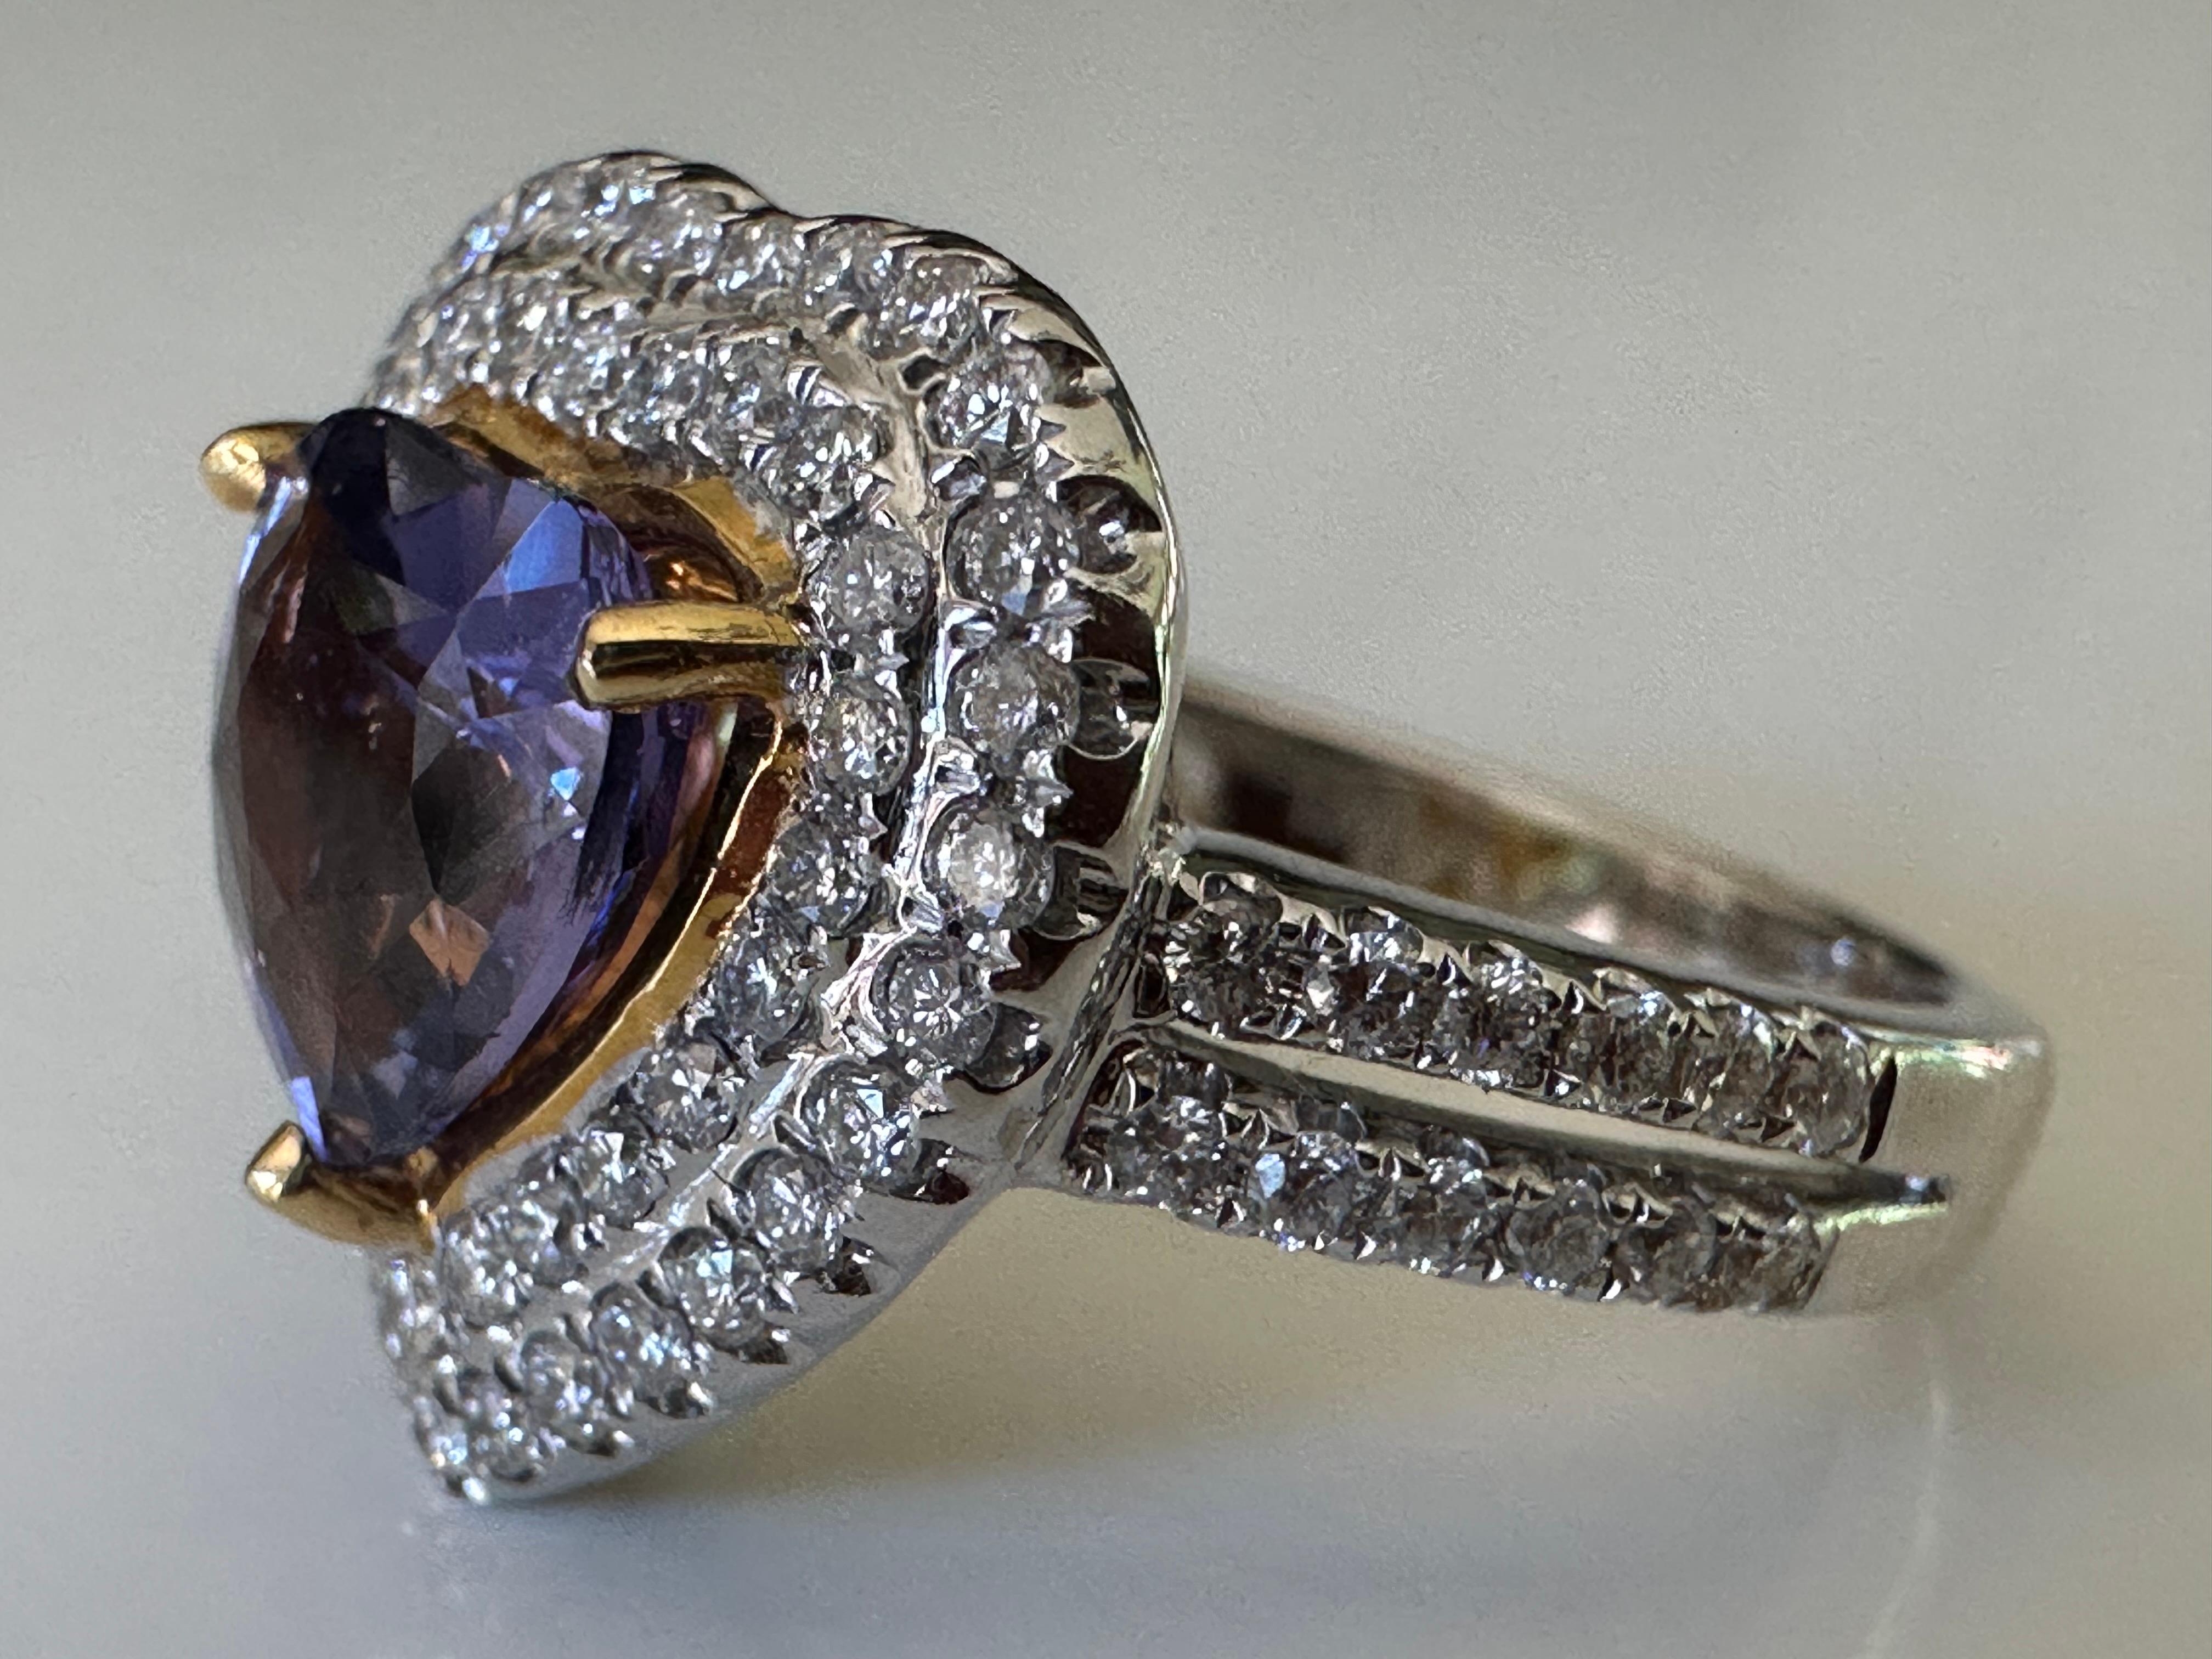 A 2.40-carat natural purple heart-shaped sapphire from Madagascar centers this exquisite ring surrounded by a double halo of seventy-six round brilliant-cut diamonds totaling 0.71 carats. Set in 18K white and yellow gold. 
